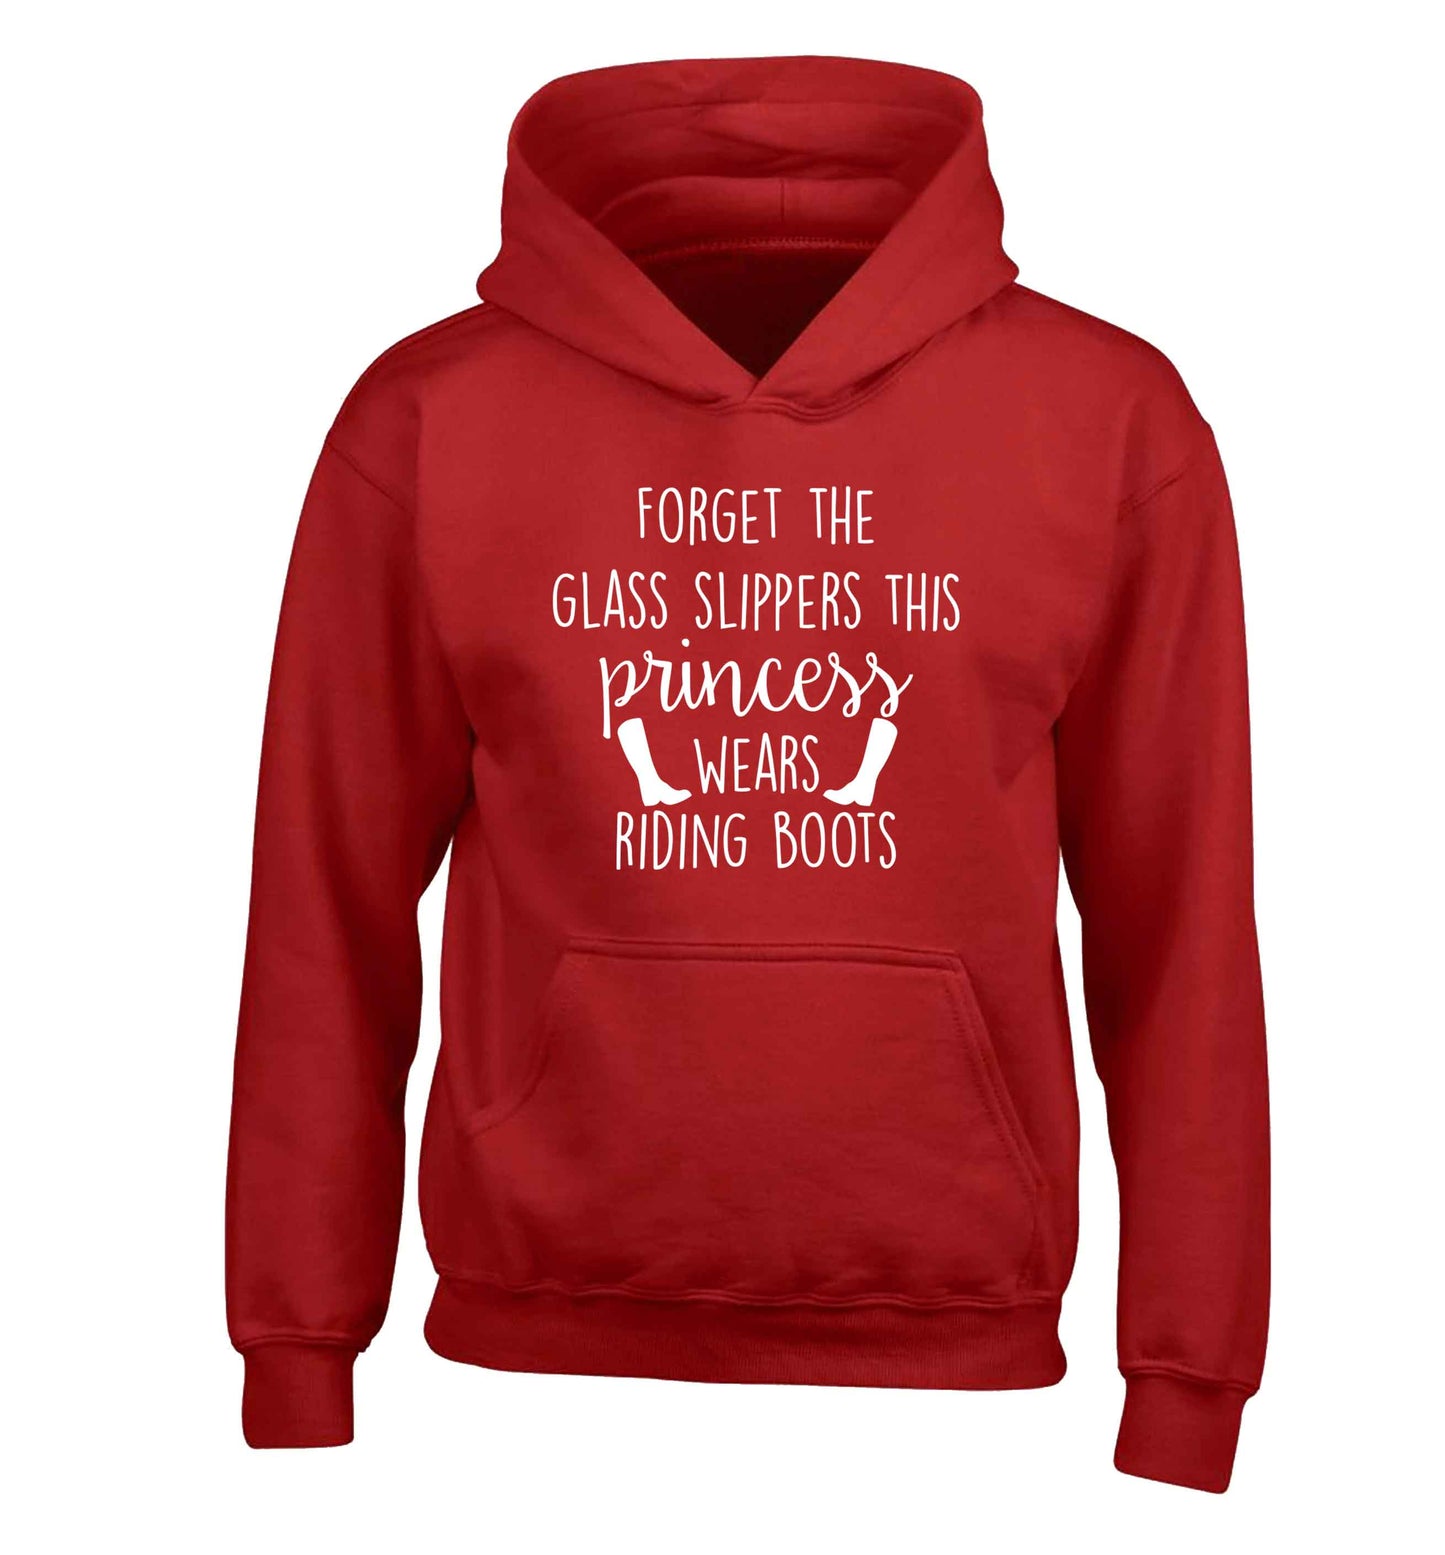 Forget the glass slippers this princess wears riding boots children's red hoodie 12-13 Years